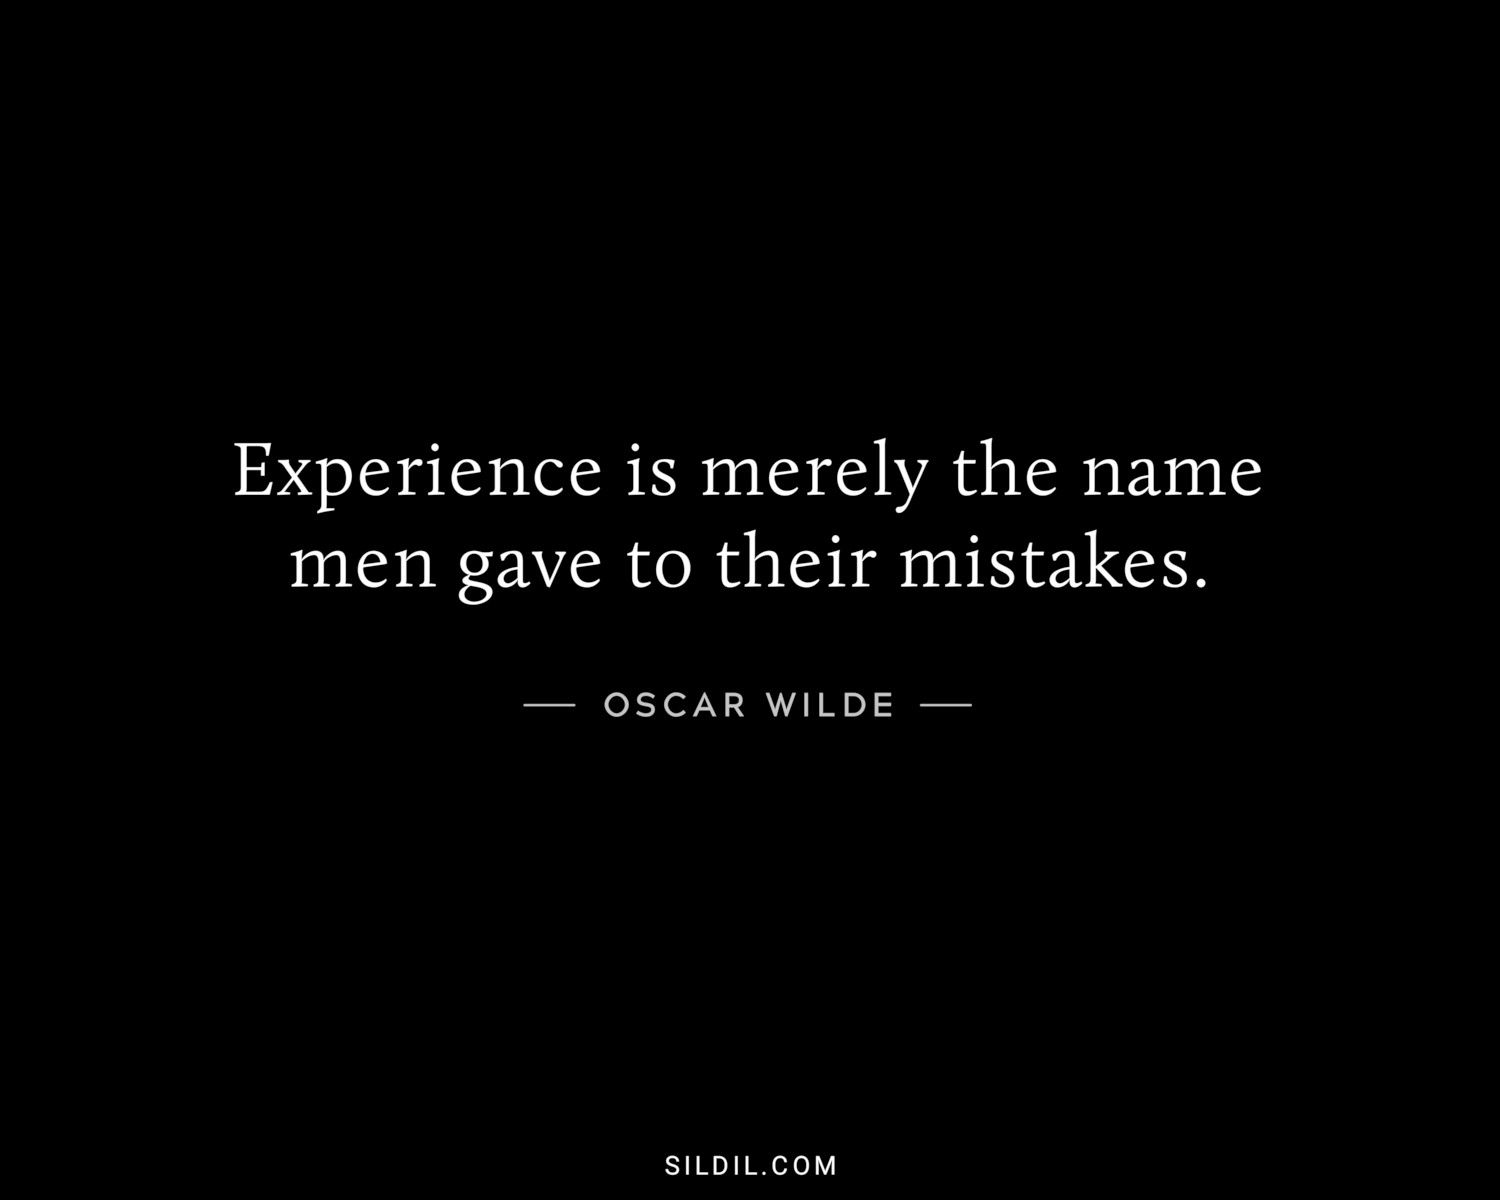 Experience is merely the name men gave to their mistakes.